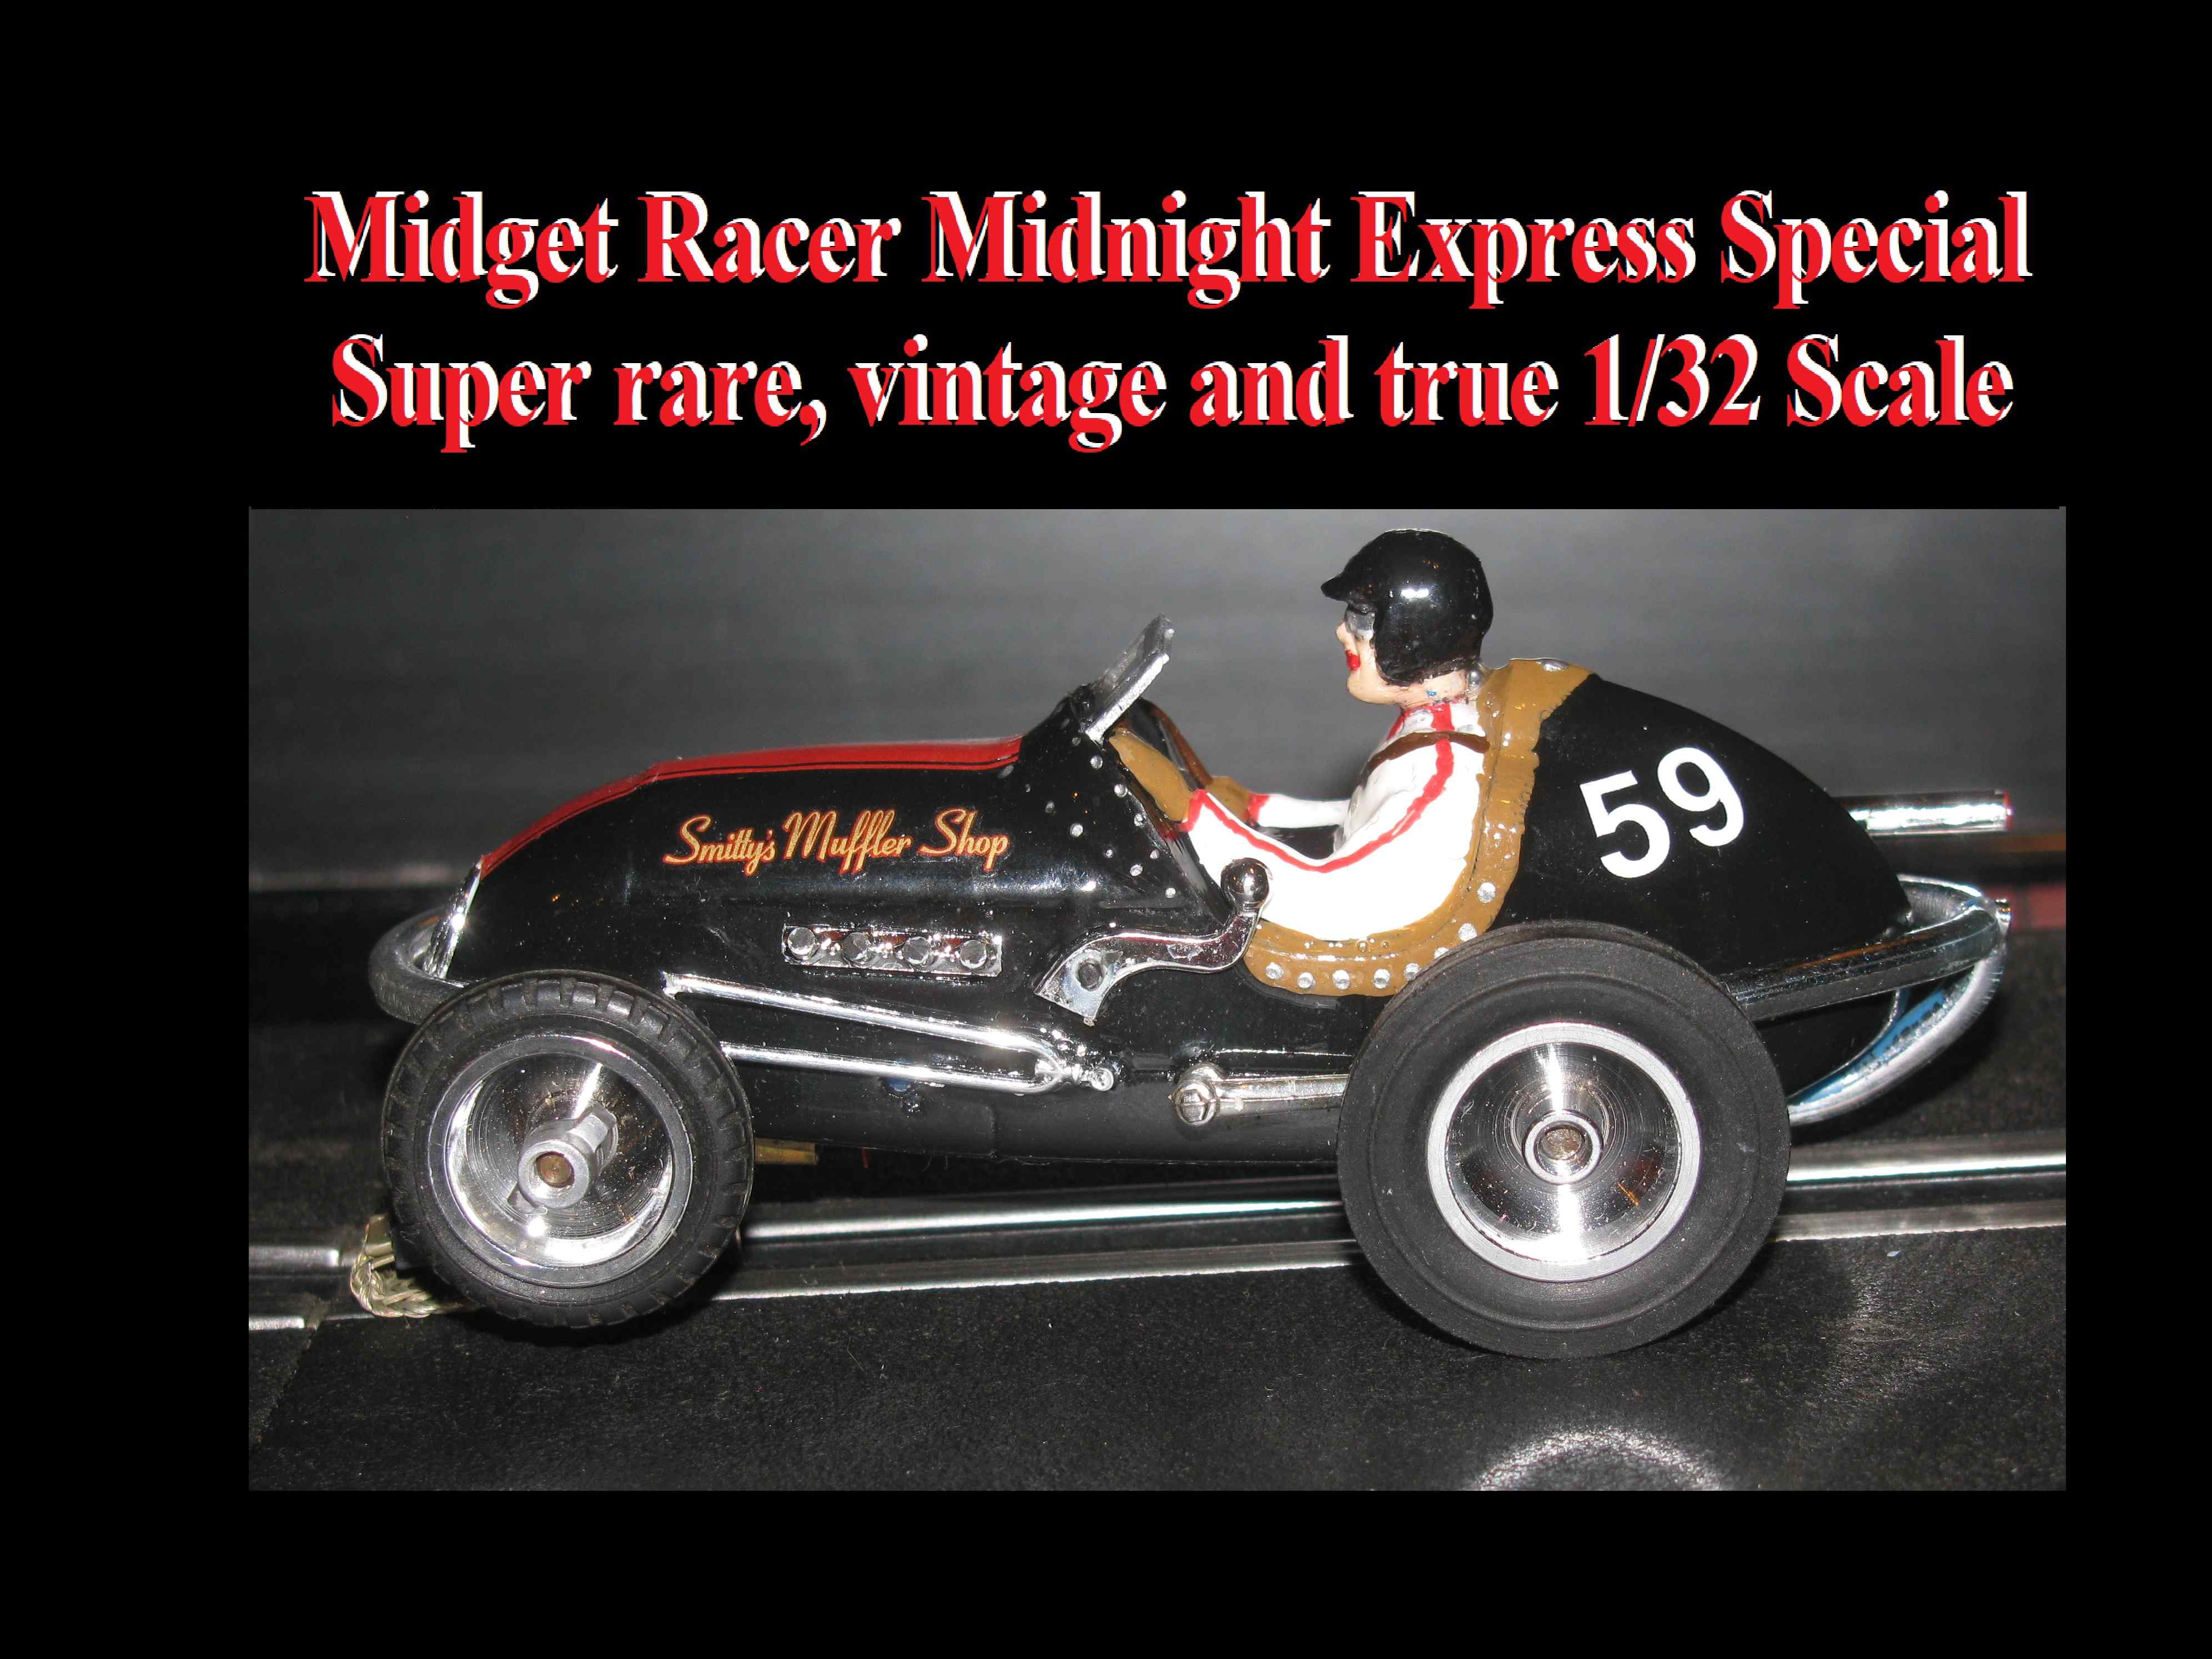 * SALE (Reg $499) * Revell Midget Racer Midnight Express Special Slot Car #59 1:32 Scale